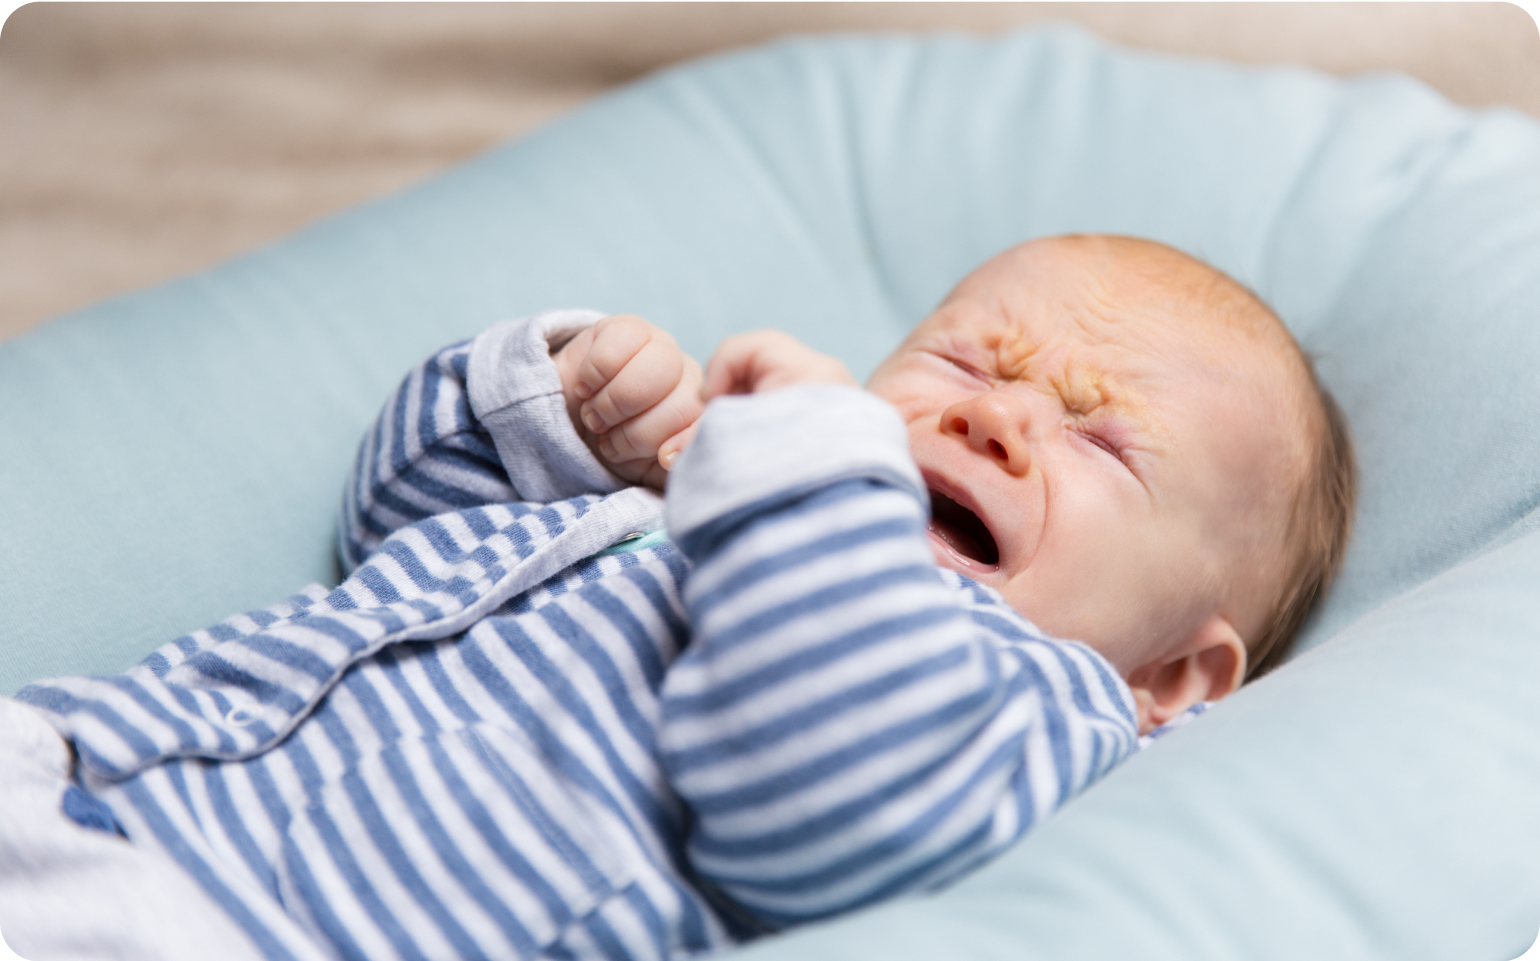 Sleep Training Baby Won’t Stop Crying – Is Crying Out Bad for Baby?